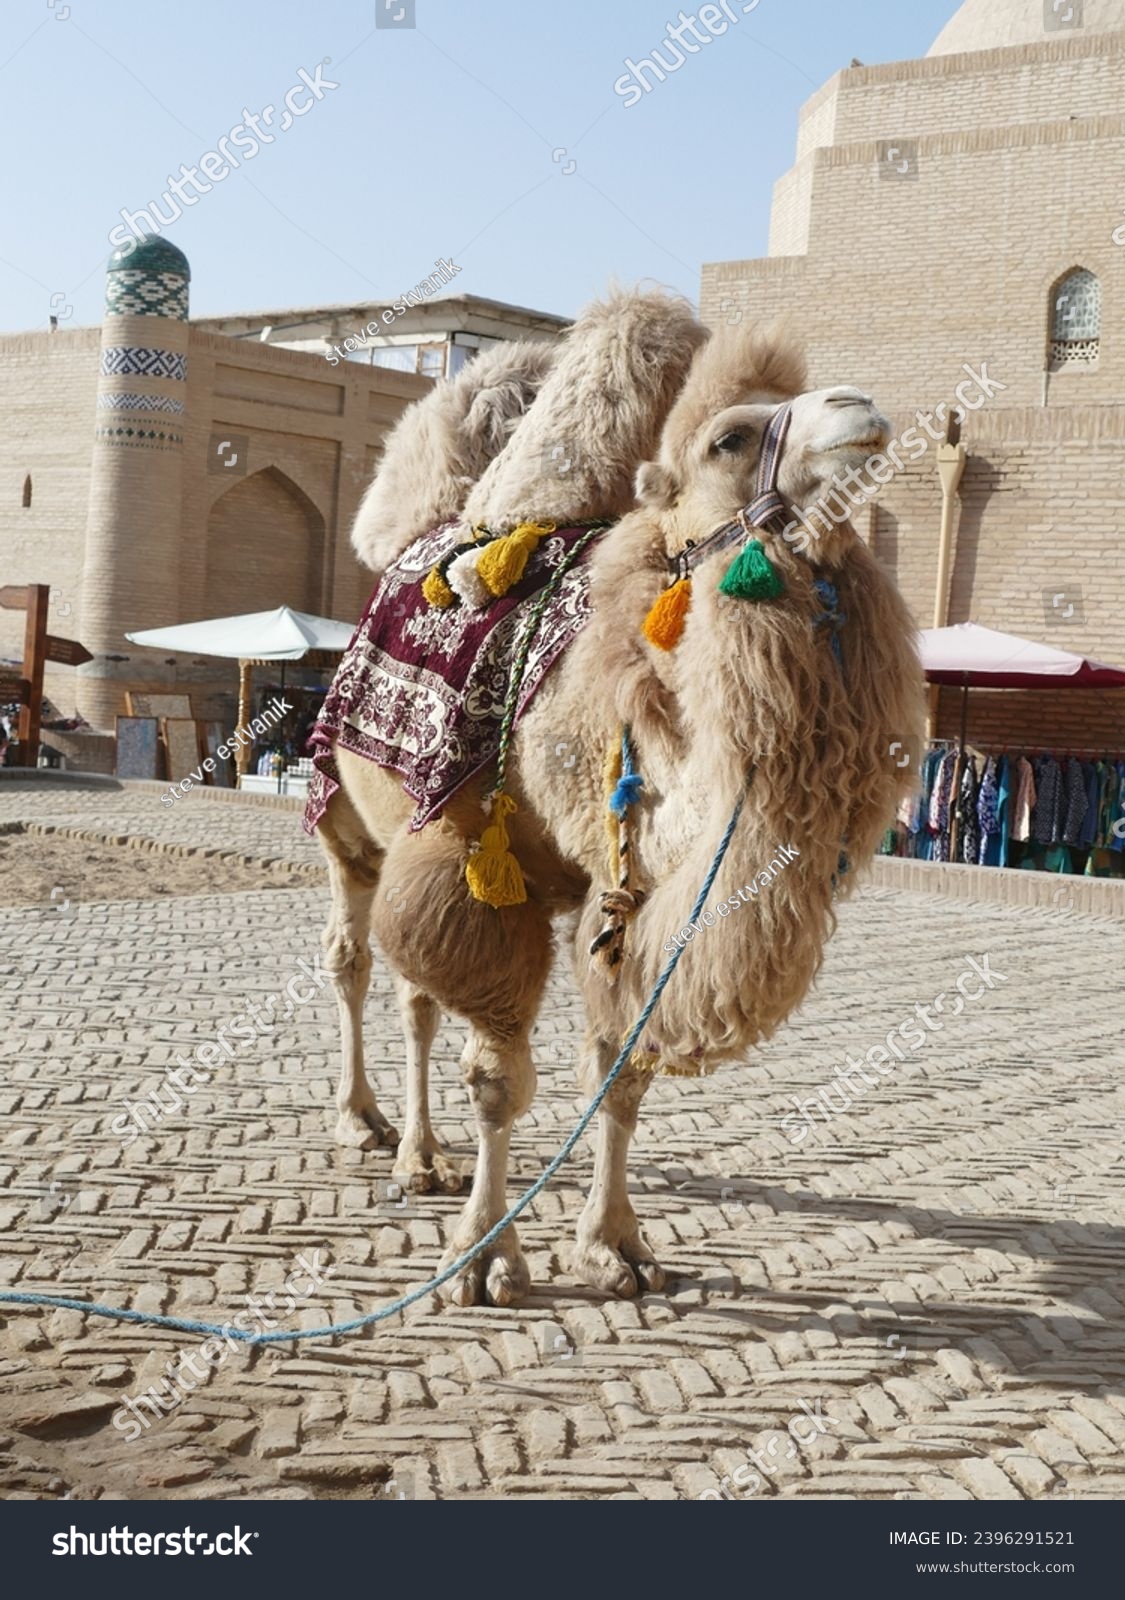 Bactrian Camel (Camelus bactrianus) poses in a small square in Khiva, Uzbekistan #2396291521